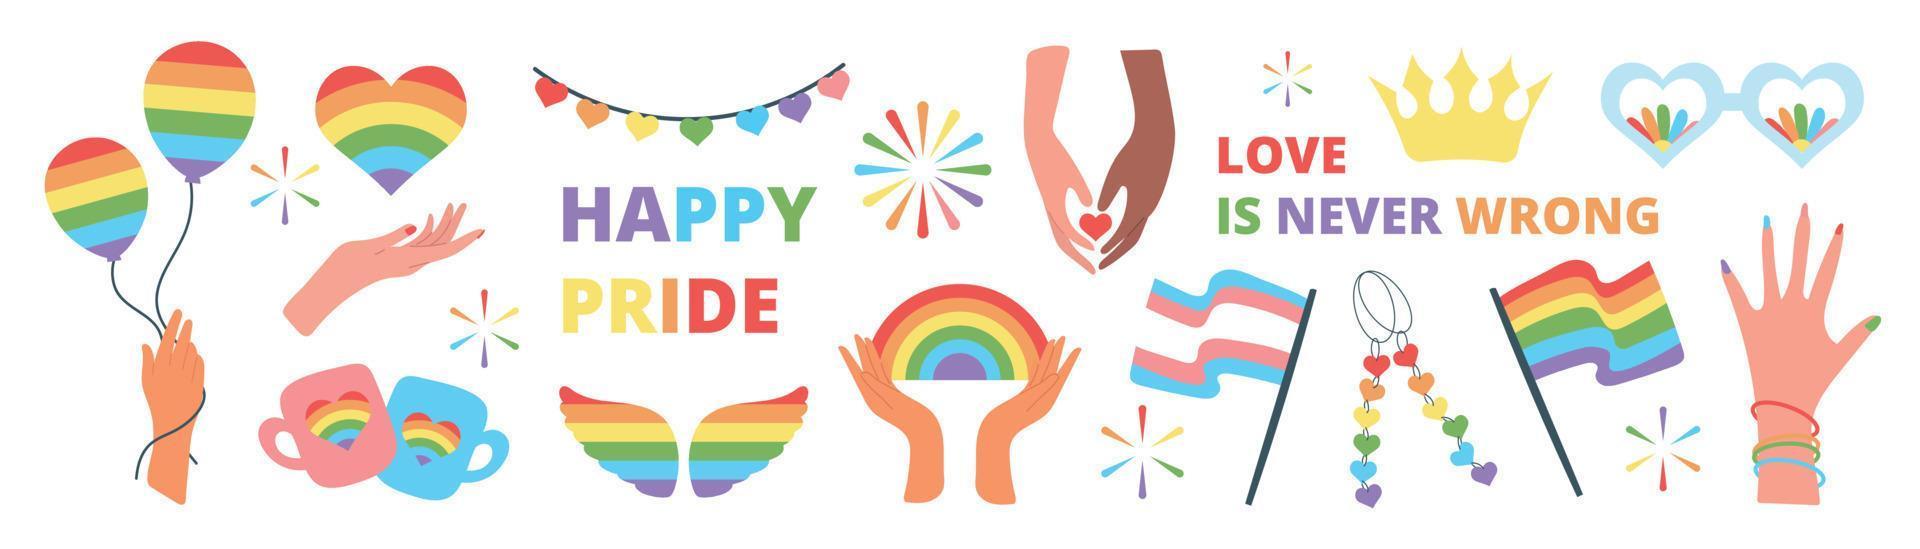 Happy Pride LGBTQ element set. LGBTQ community symbols with rainbow flag, balloon, crown, quote. Elements illustrated for pride month, bisexual, transgender, gender equality, sticker, rights concept. vector